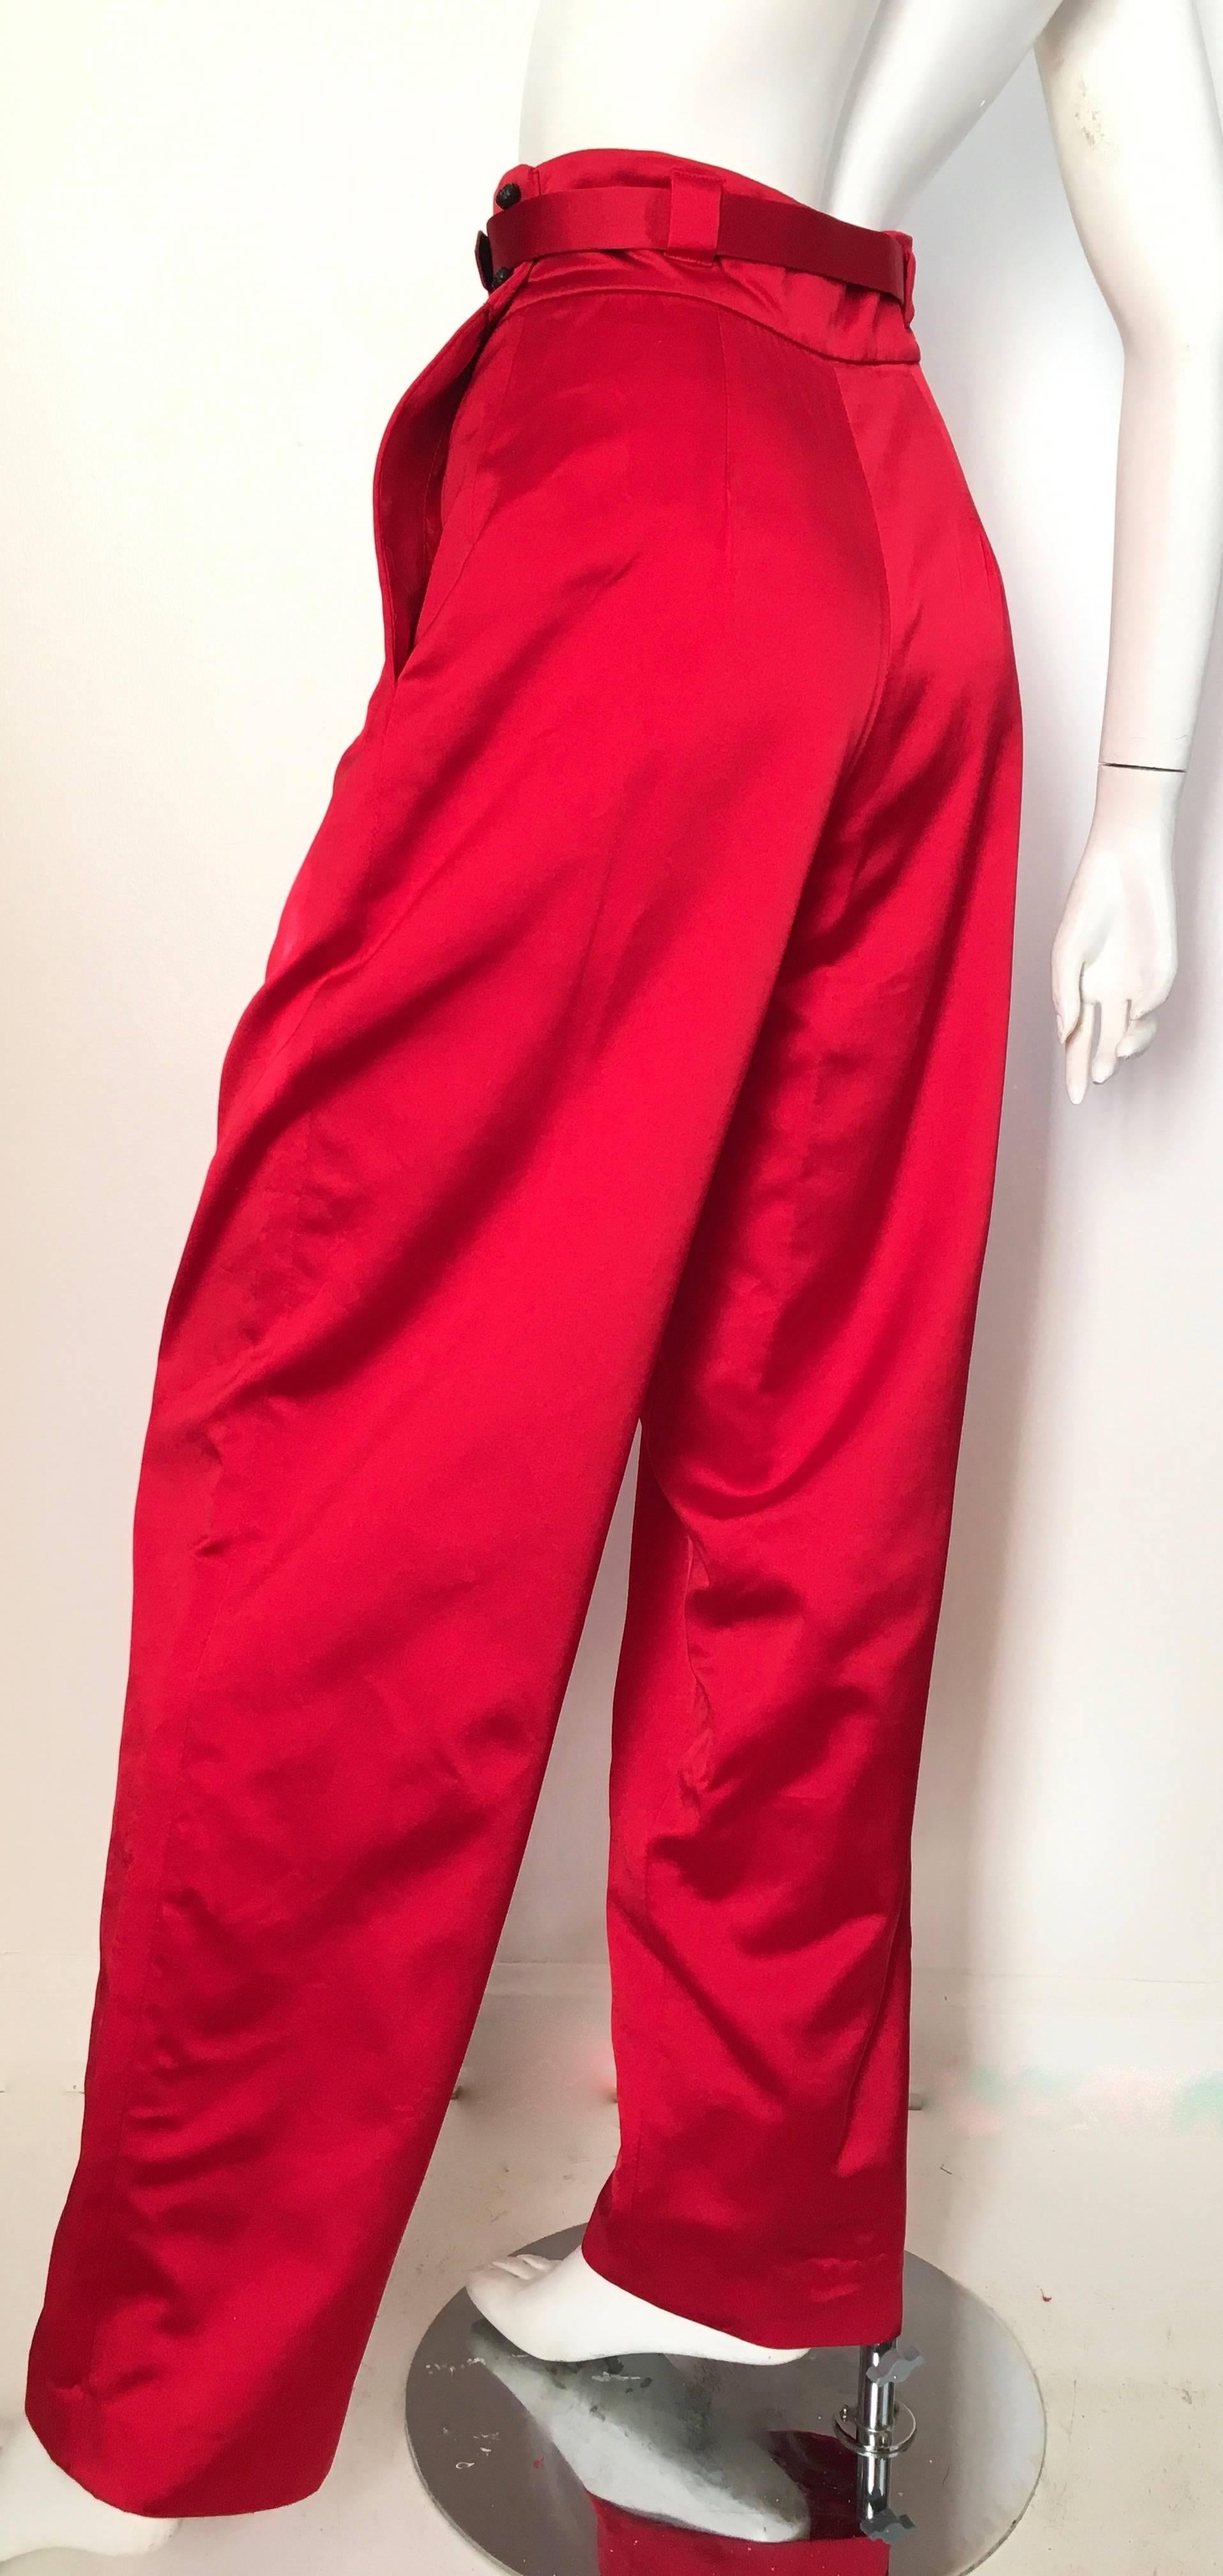 Women's or Men's Bill Blass Red Satin Pleated Evening Pants with Pockets Size 4. For Sale